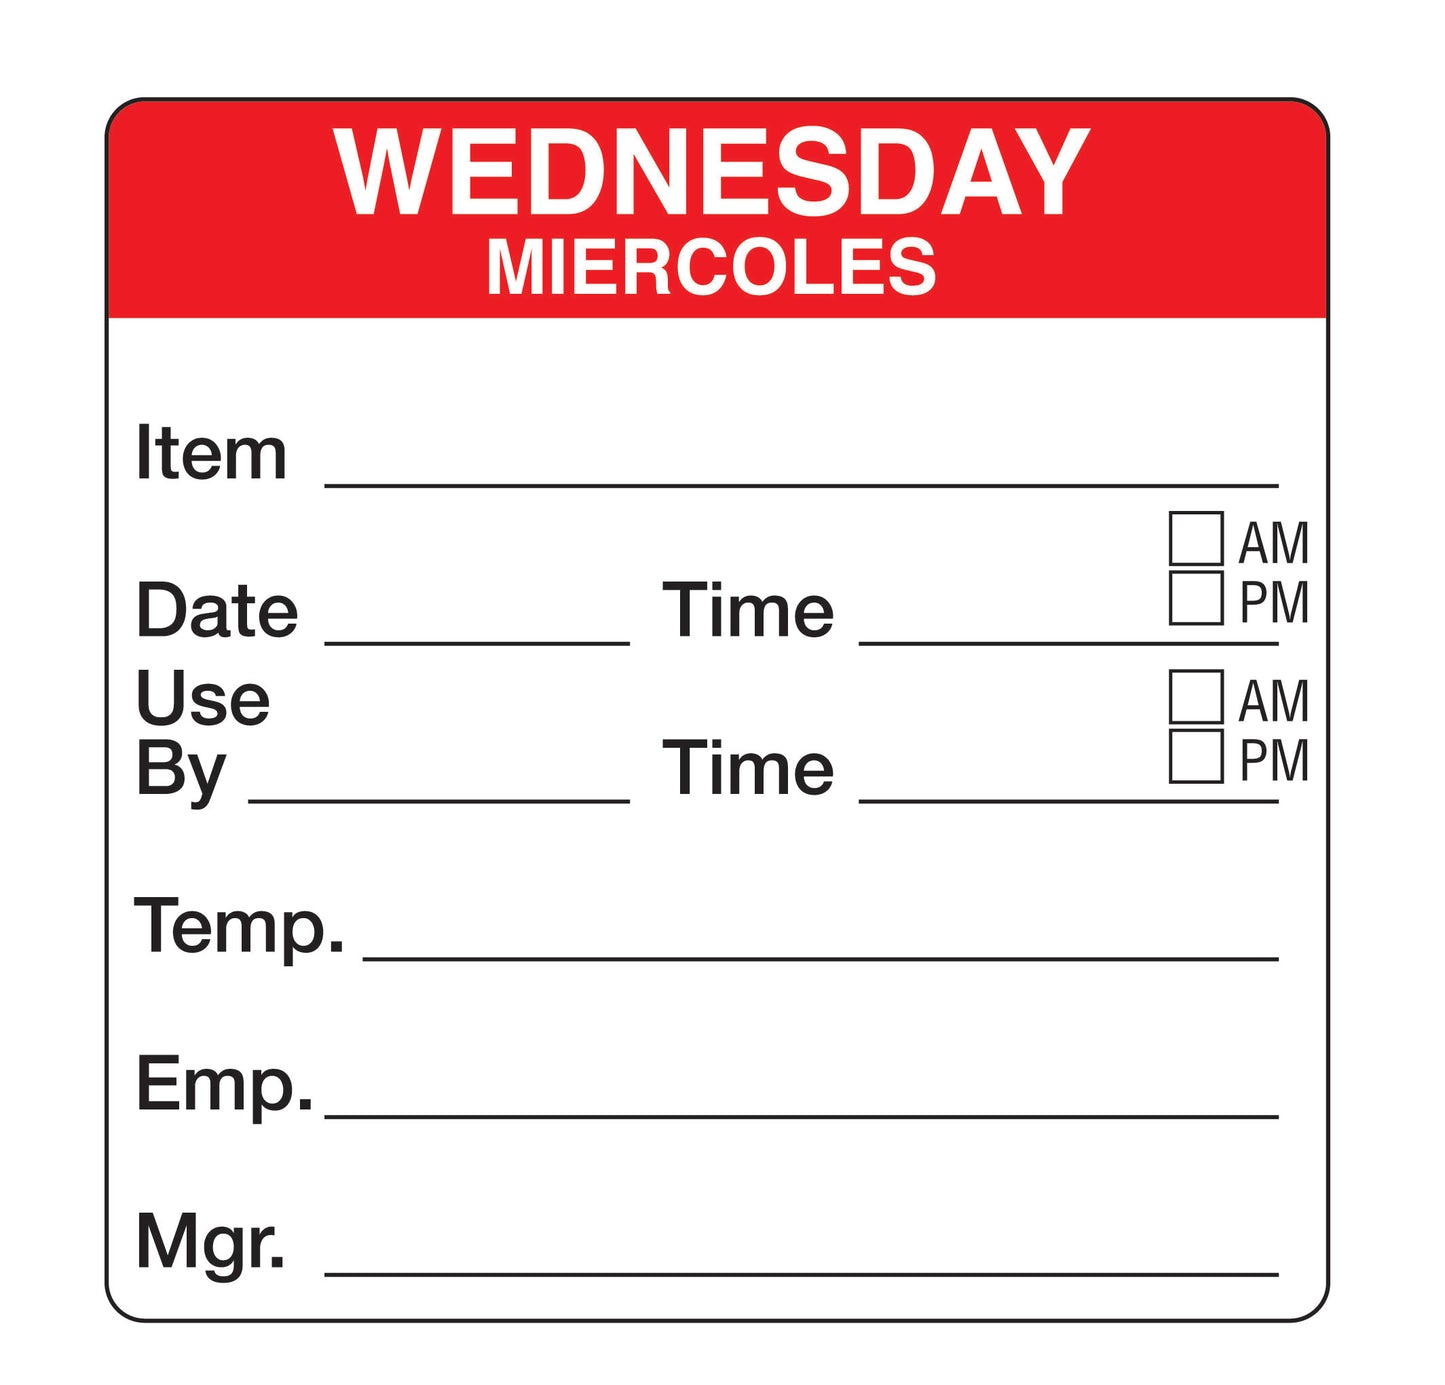 Wednesday - Miercoles 2" x 2" Removable Day of the Week Prep Date Label